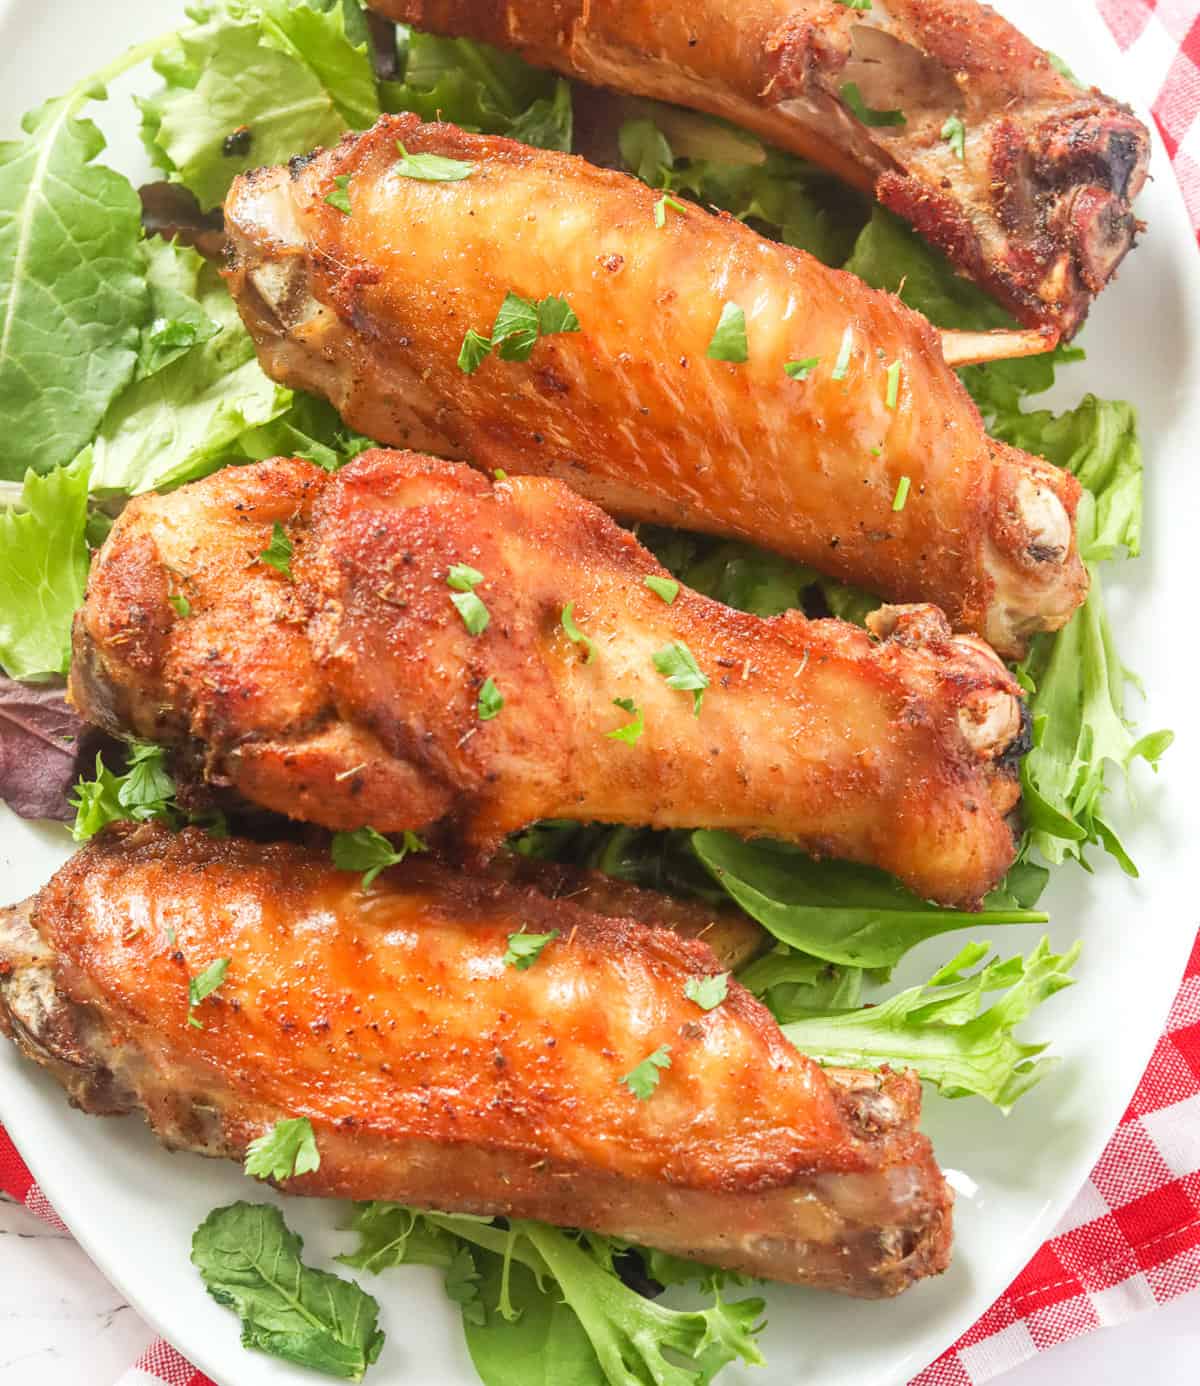 Freshly fried turkey wings for the perfect appetizer or main course